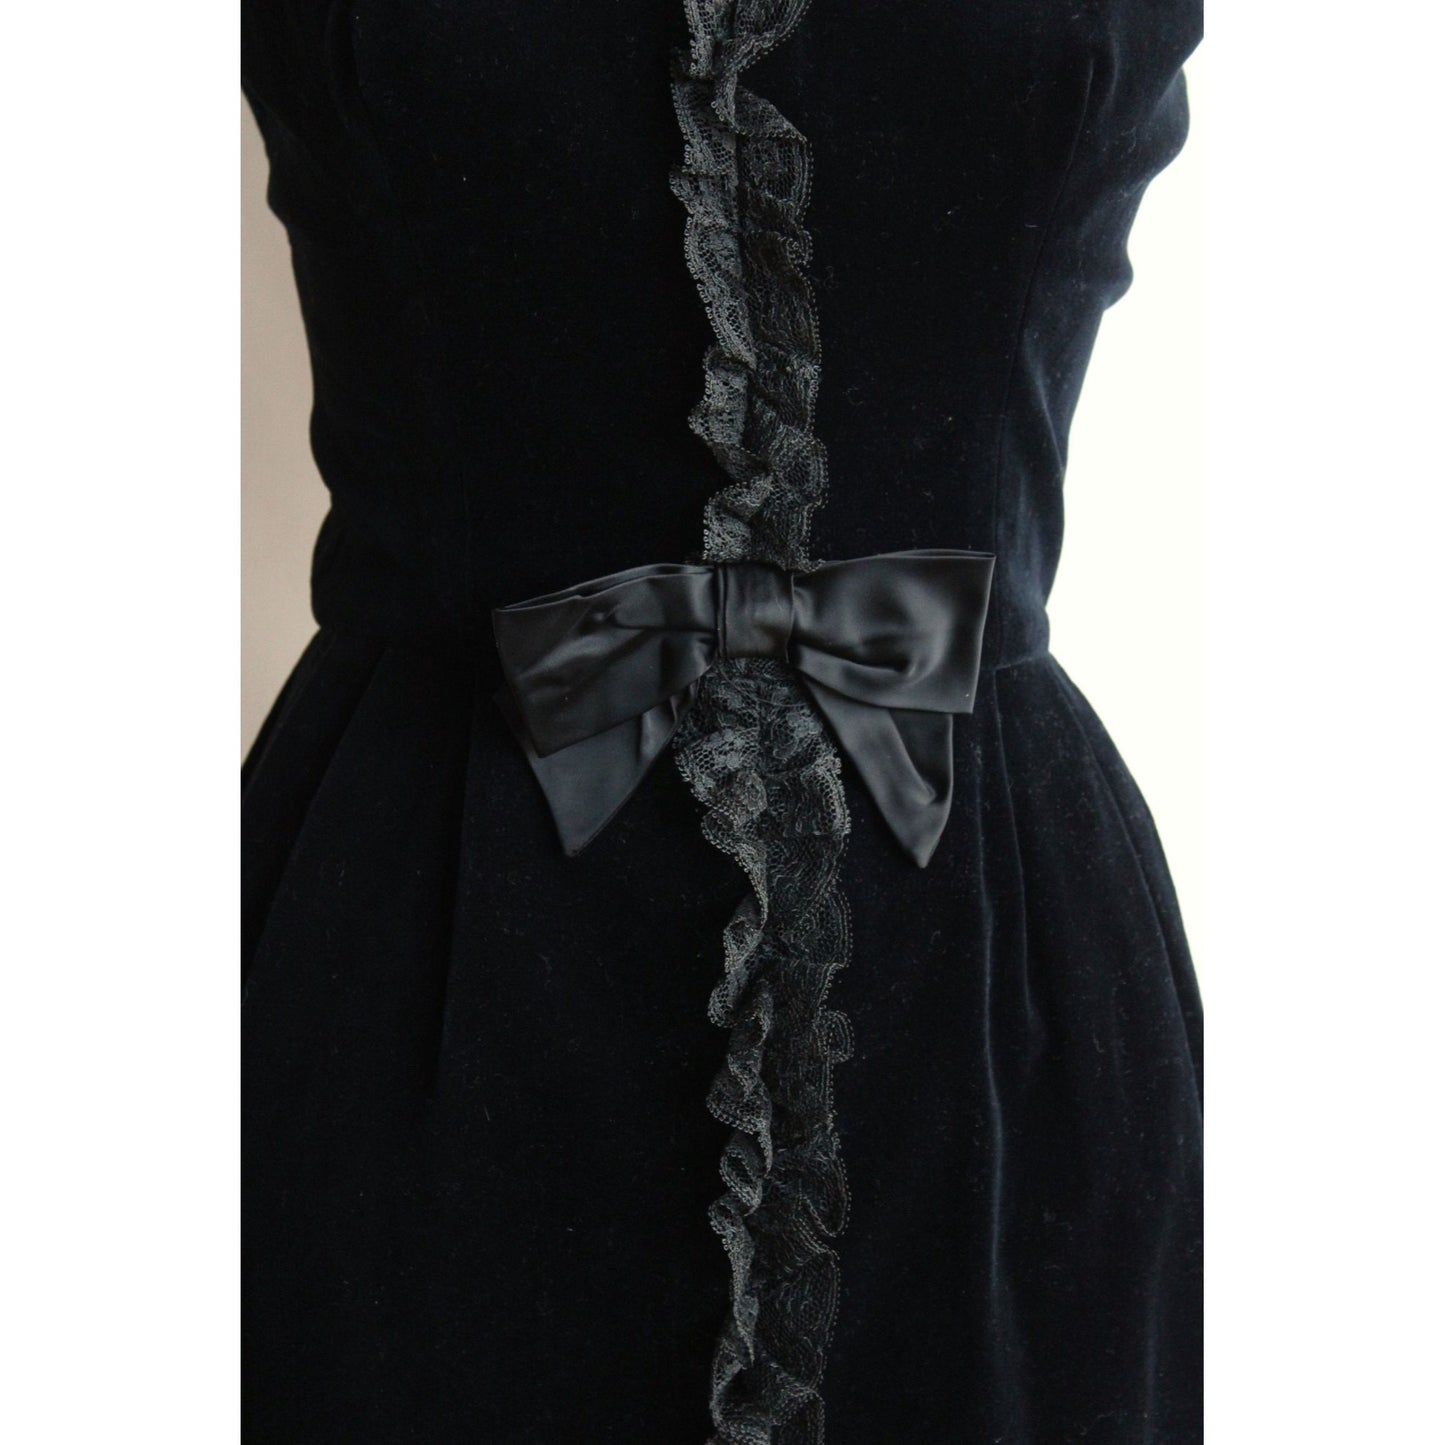 Vintage 1960s Black Velvet Wiggle Dress WIth Lace Ruffle and Bow